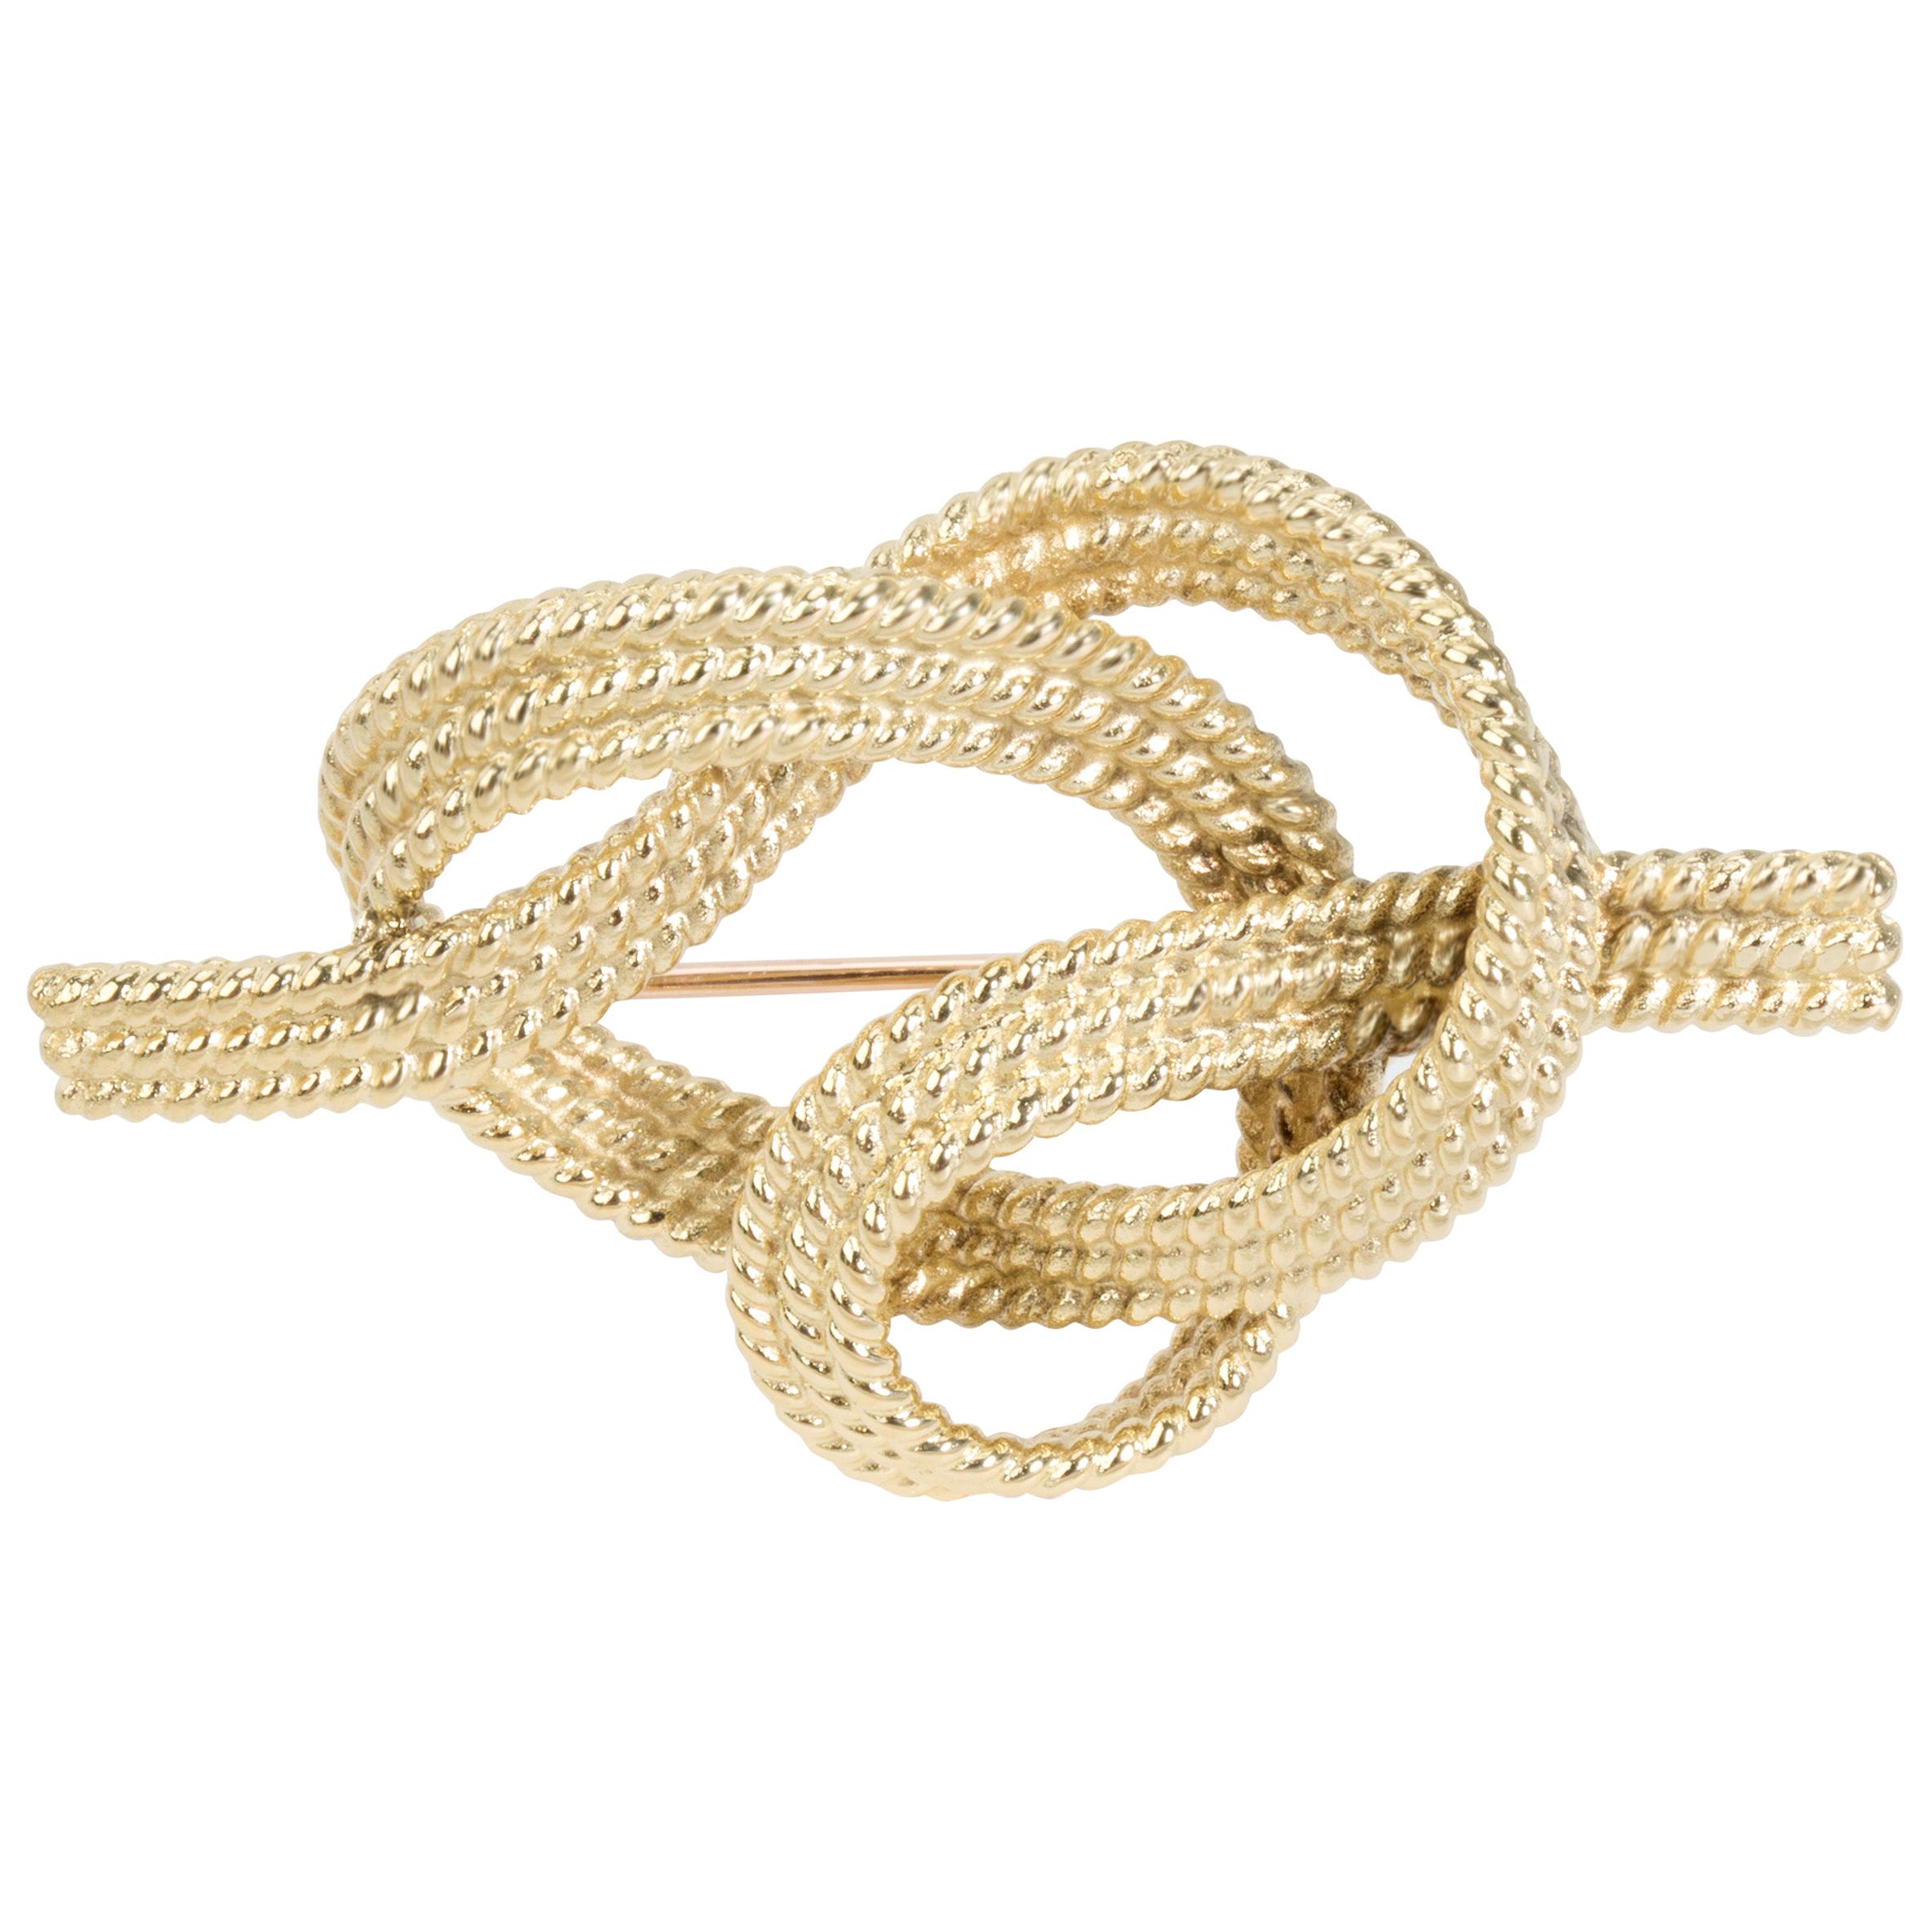 Vintage Tiffany & Co. Rope Knot Brooch in 18 Karat Yellow Gold